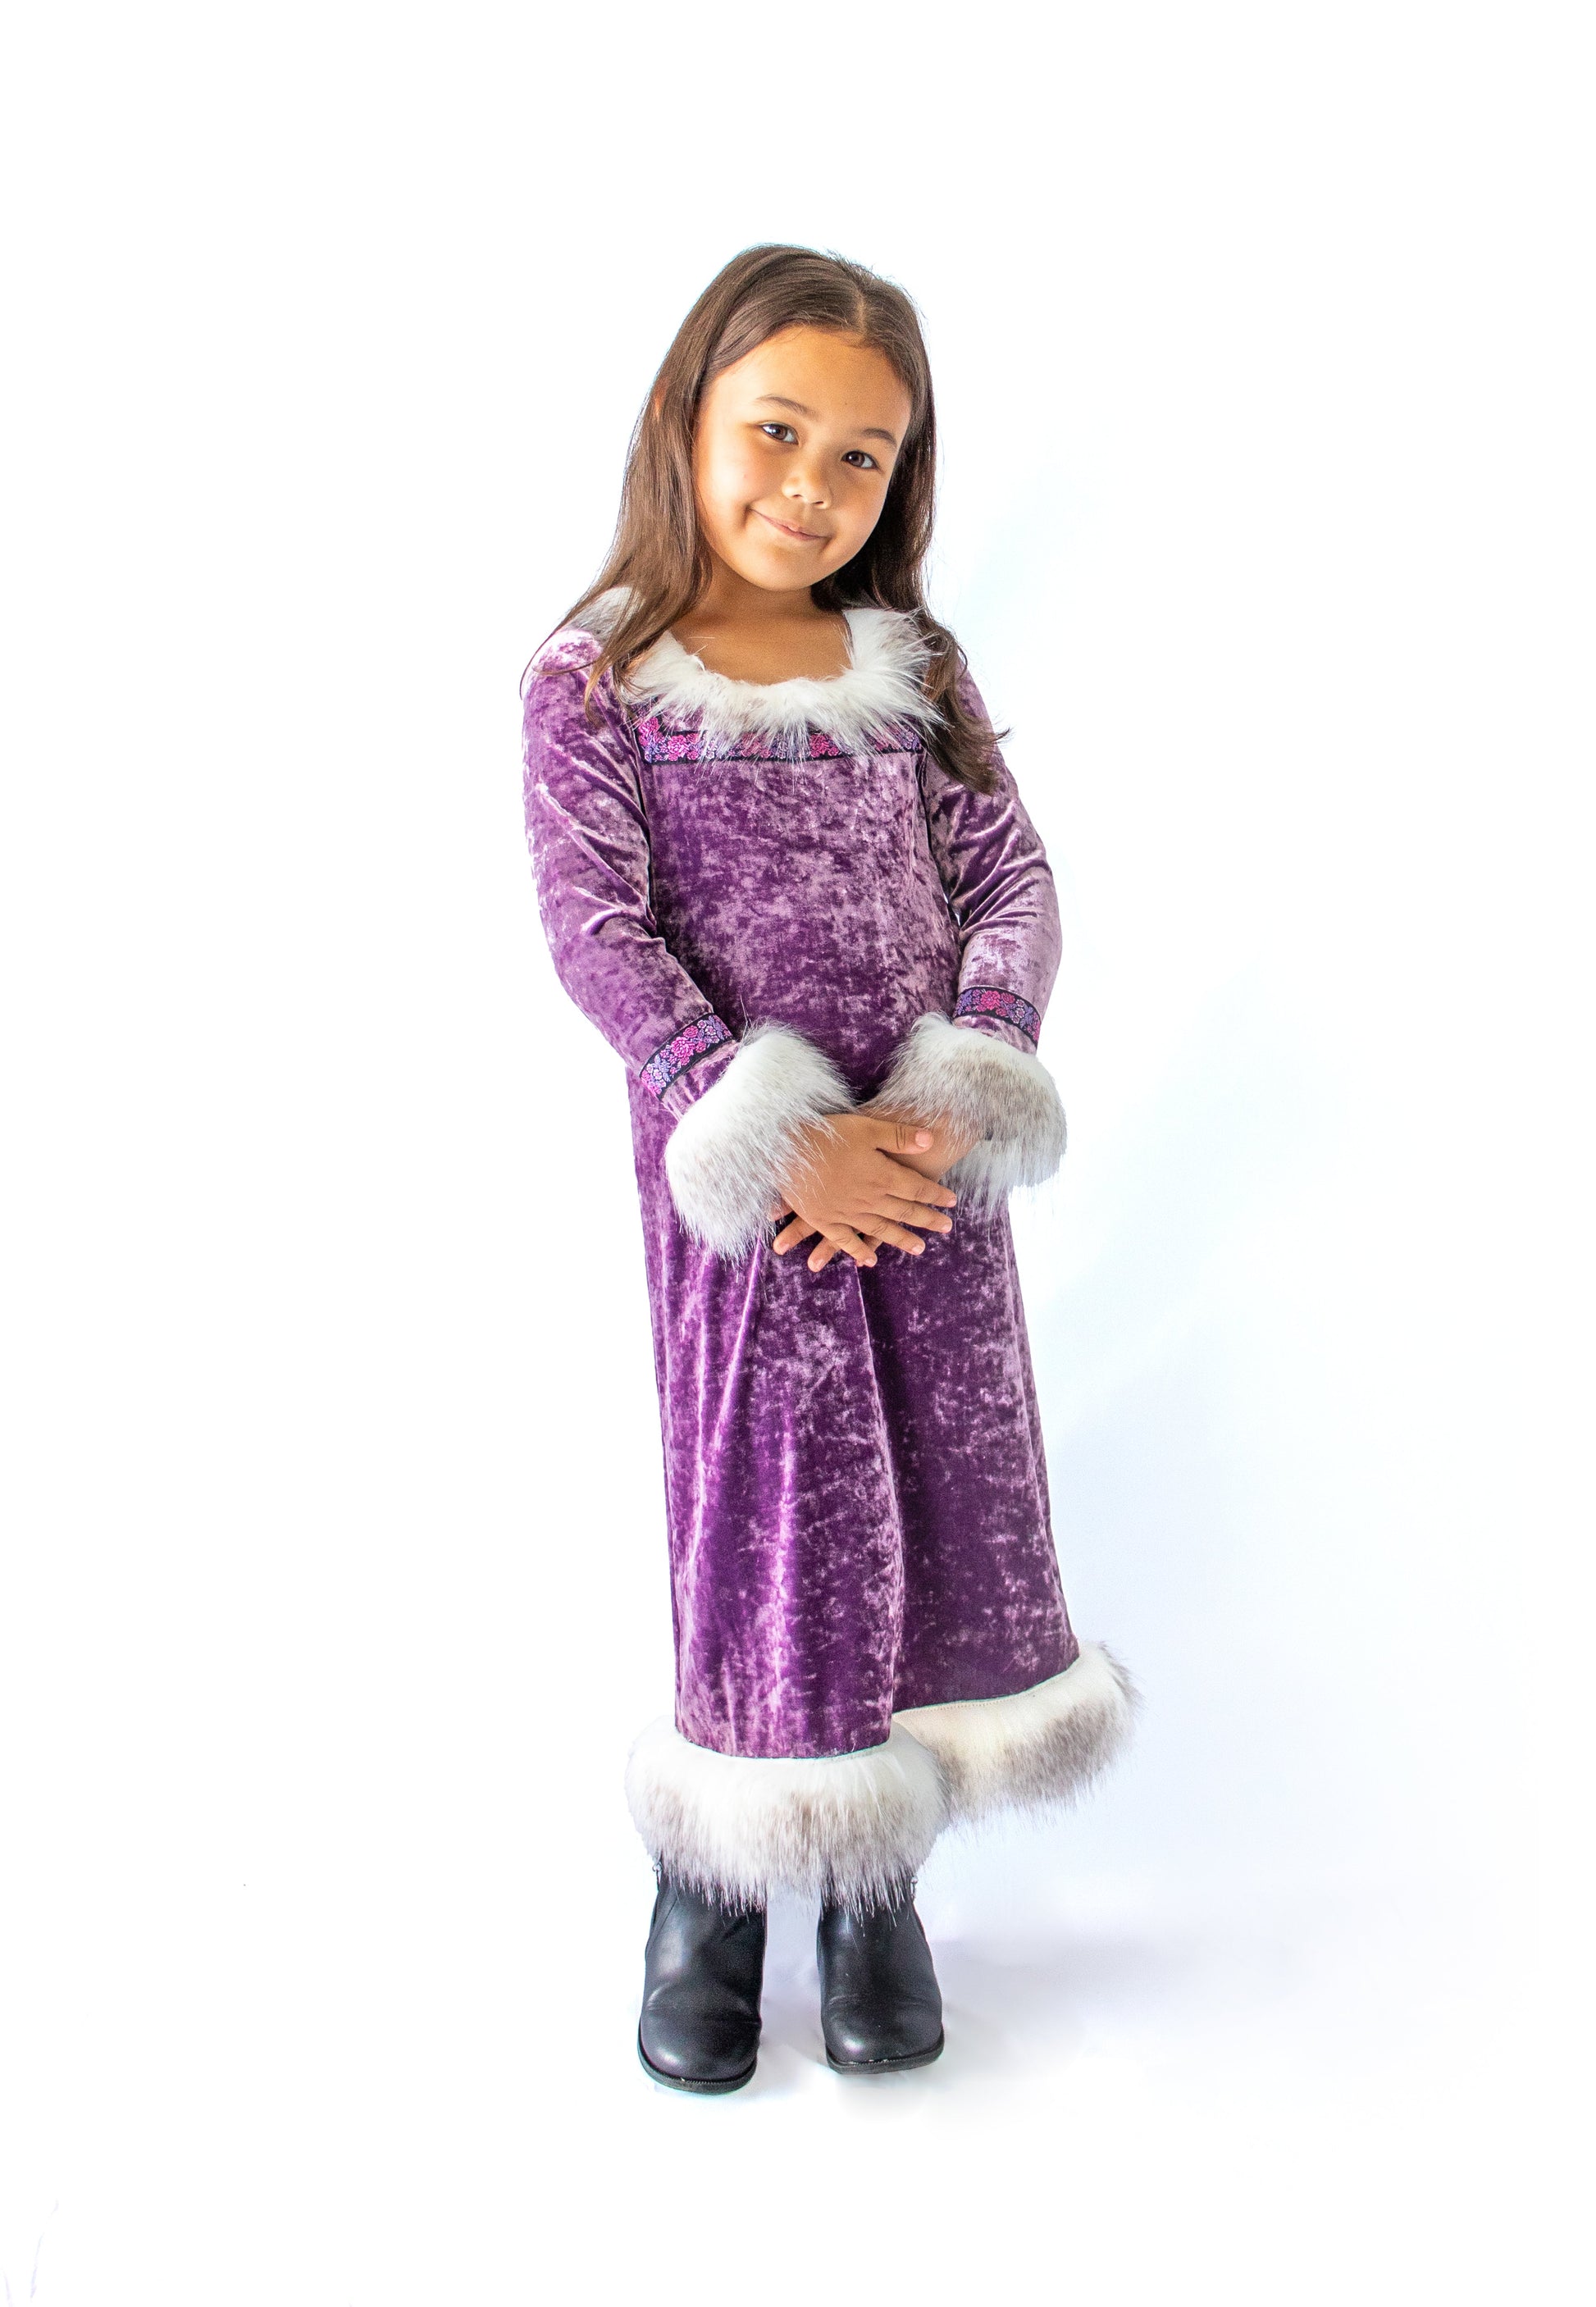 Kid's Princess Dress Lavender, for children, long with faux fur at the ends, collar, and cuffed sleeves